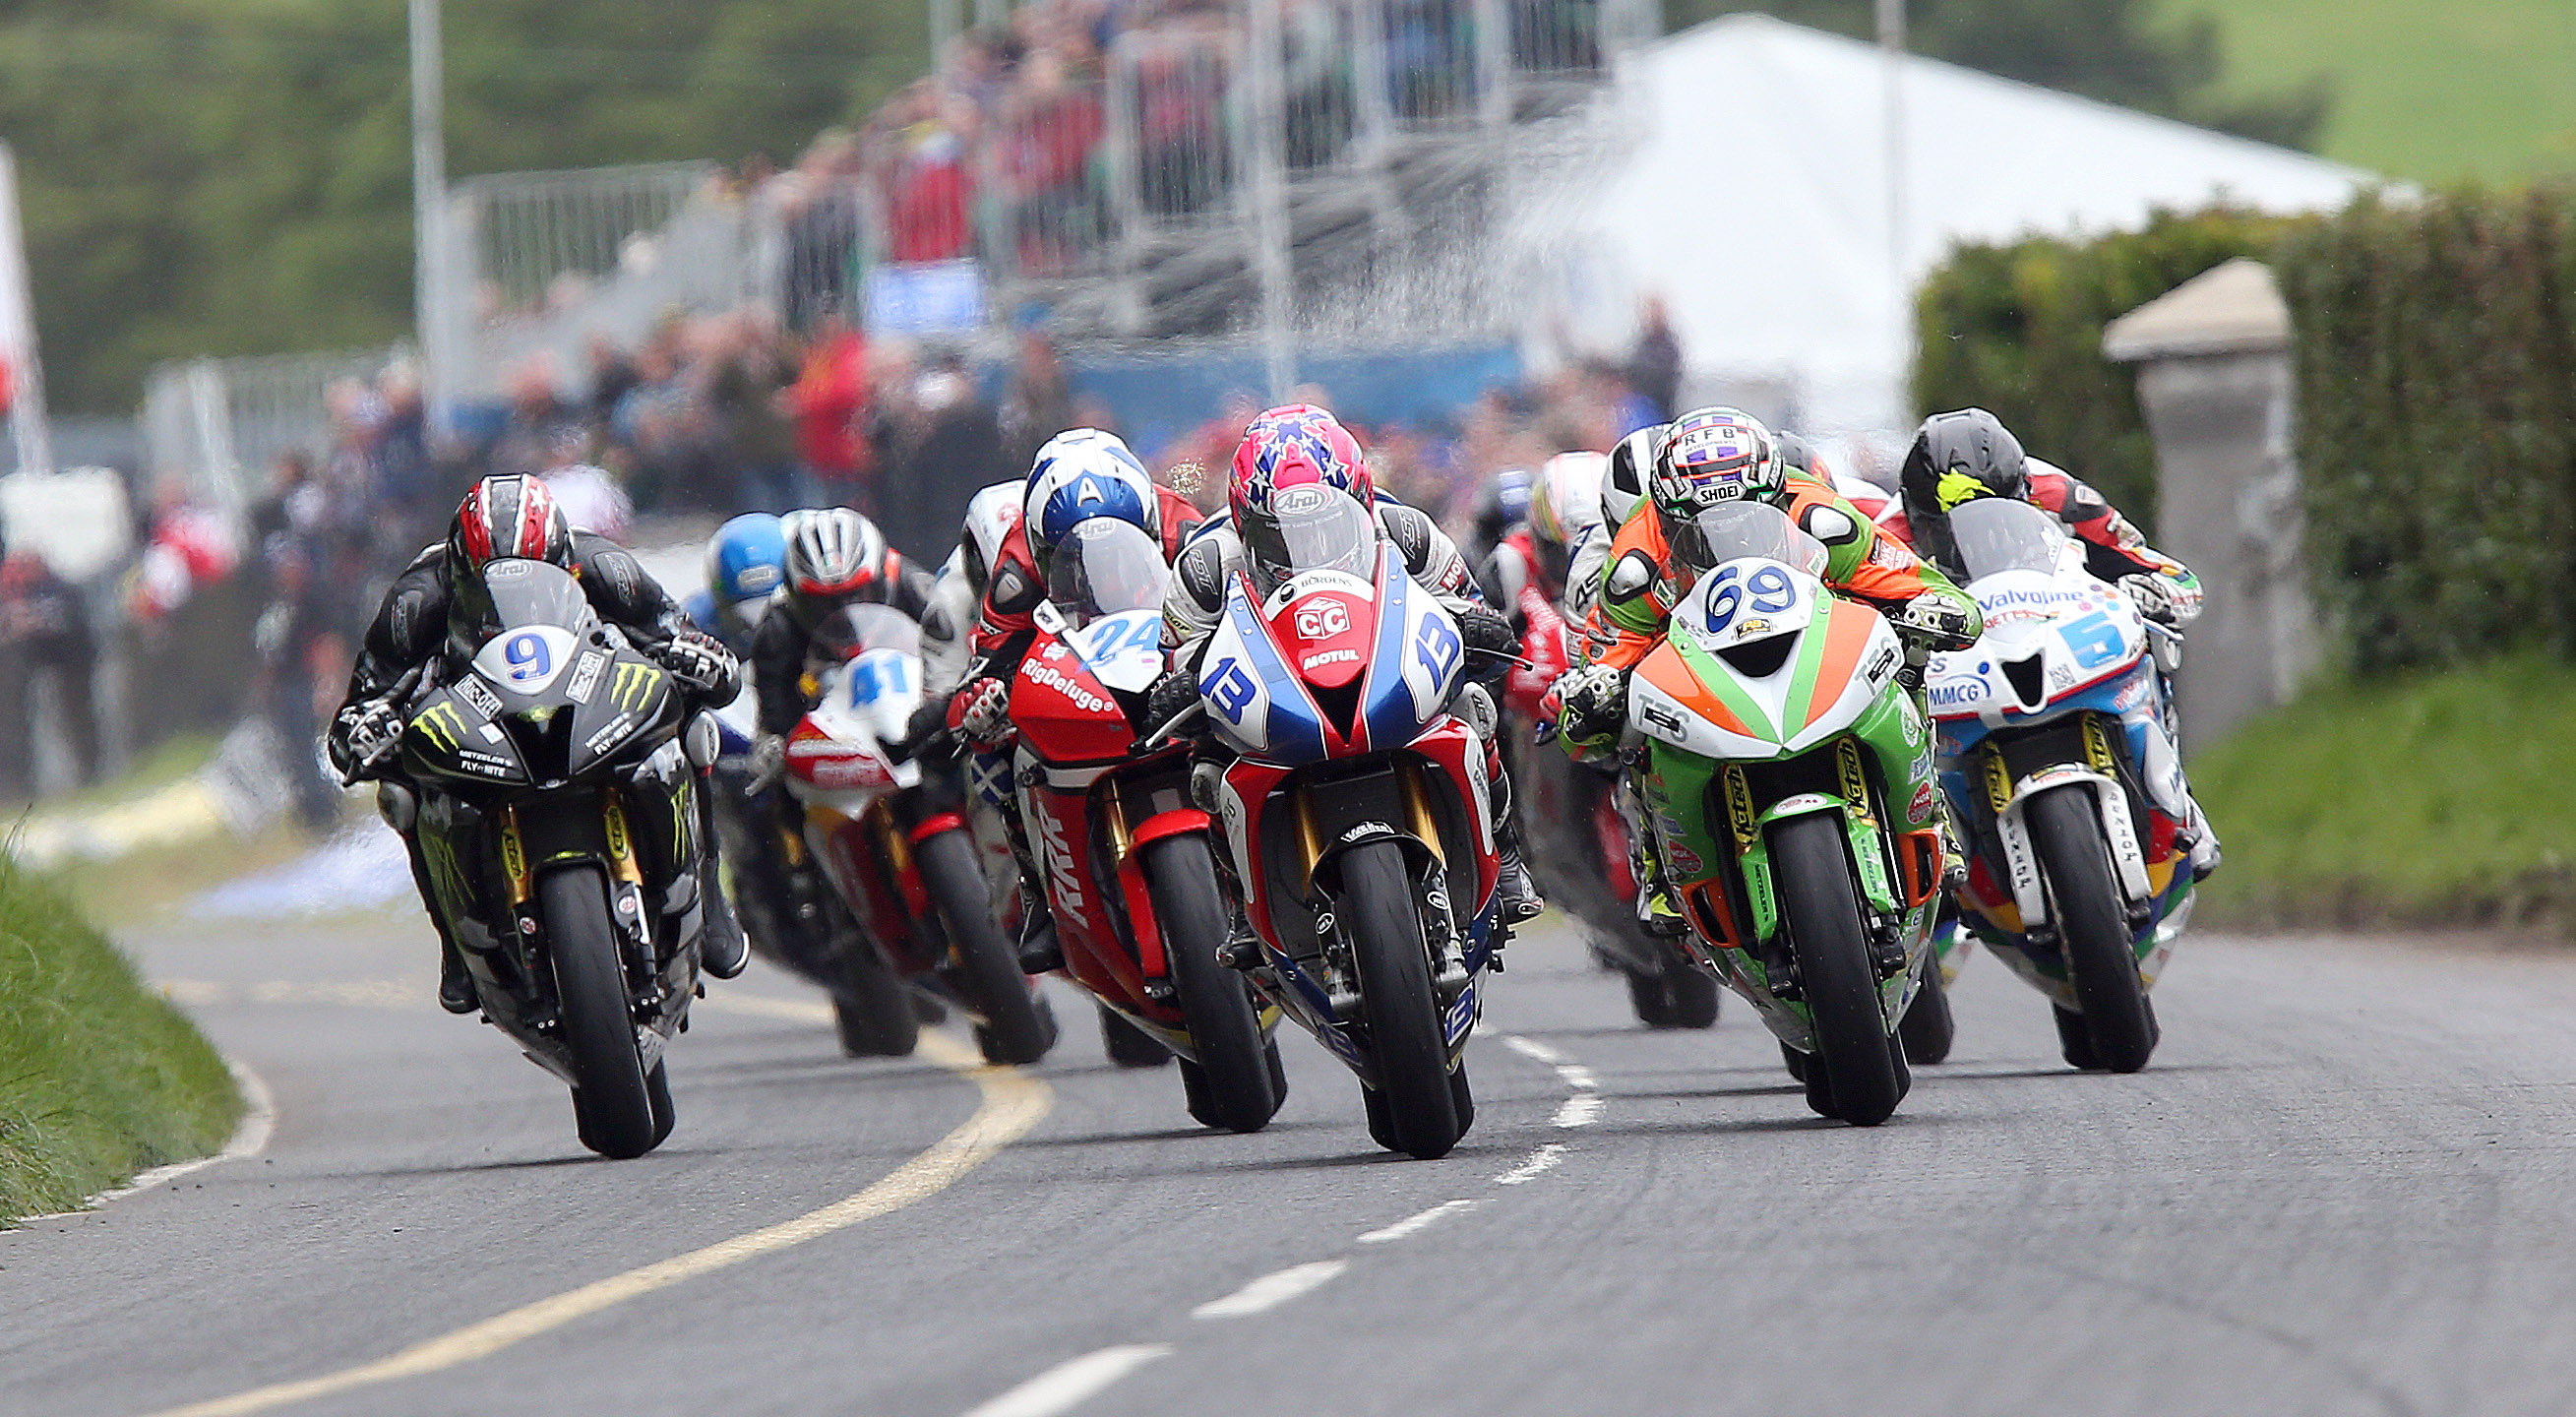 Revised schedule announced for 2016 Ulster Grand Prix - Ulster Grand